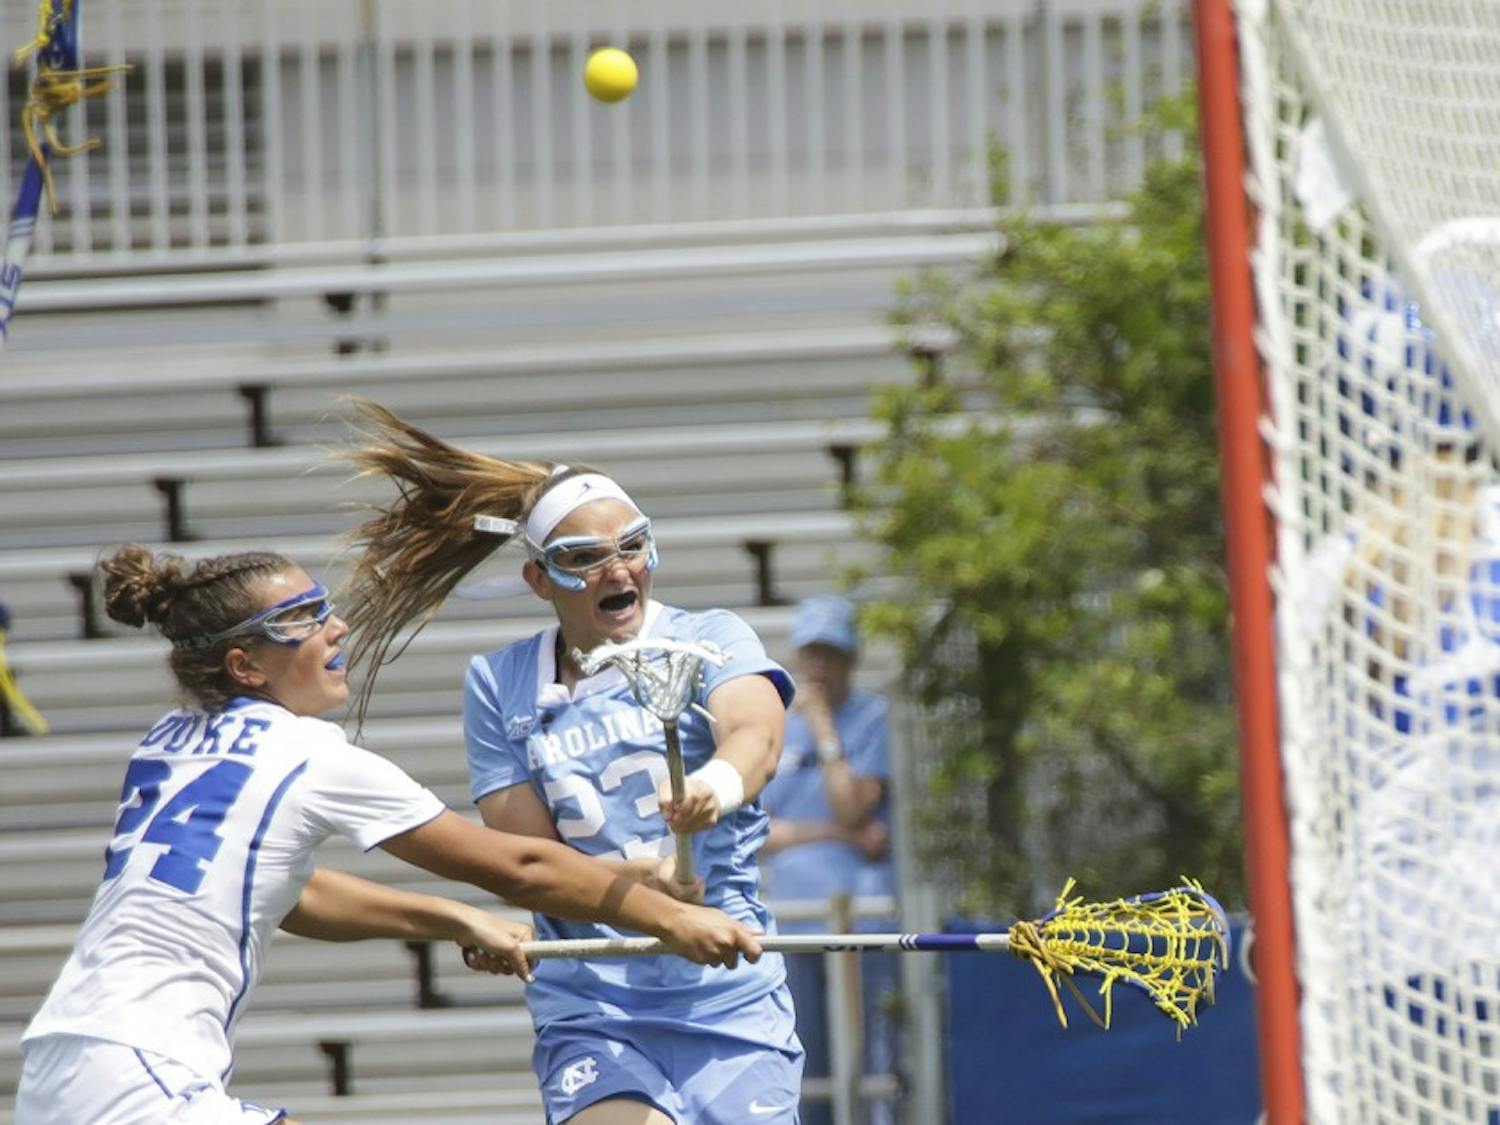 North Carolina women's lacrosse team attacker Molly Hendrick&nbsp;shoots against Duke on April 22. Hendrick finished with a career-high seven goals in both this game and UNC's ACC&nbsp;Tournament championship win against Syracuse.